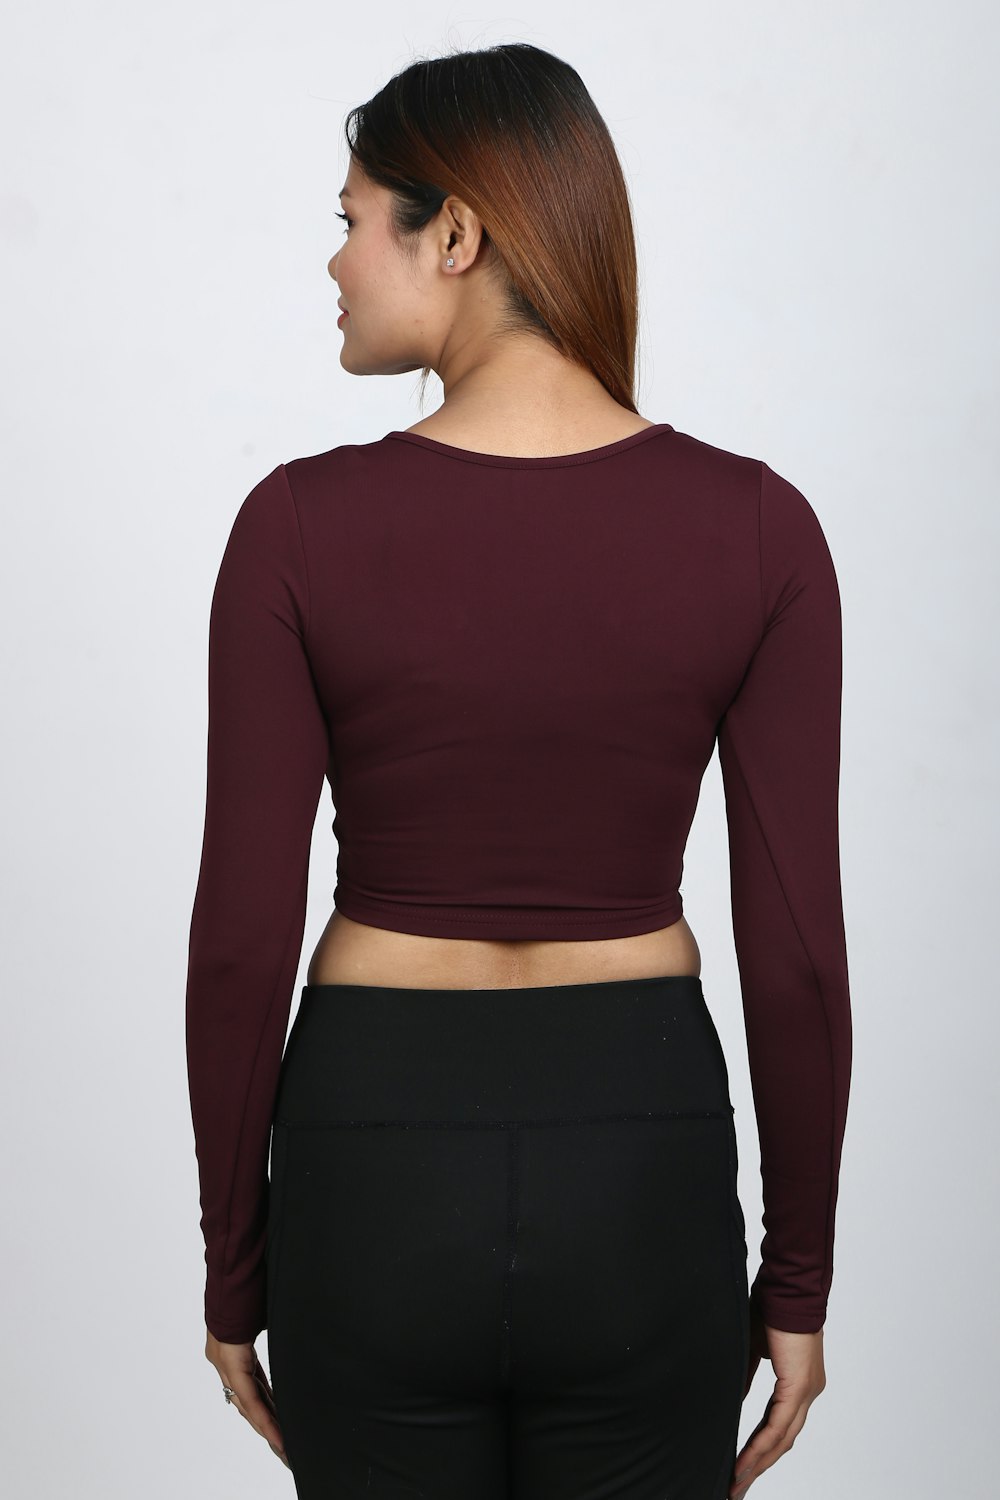 a woman in black pants and a maroon top